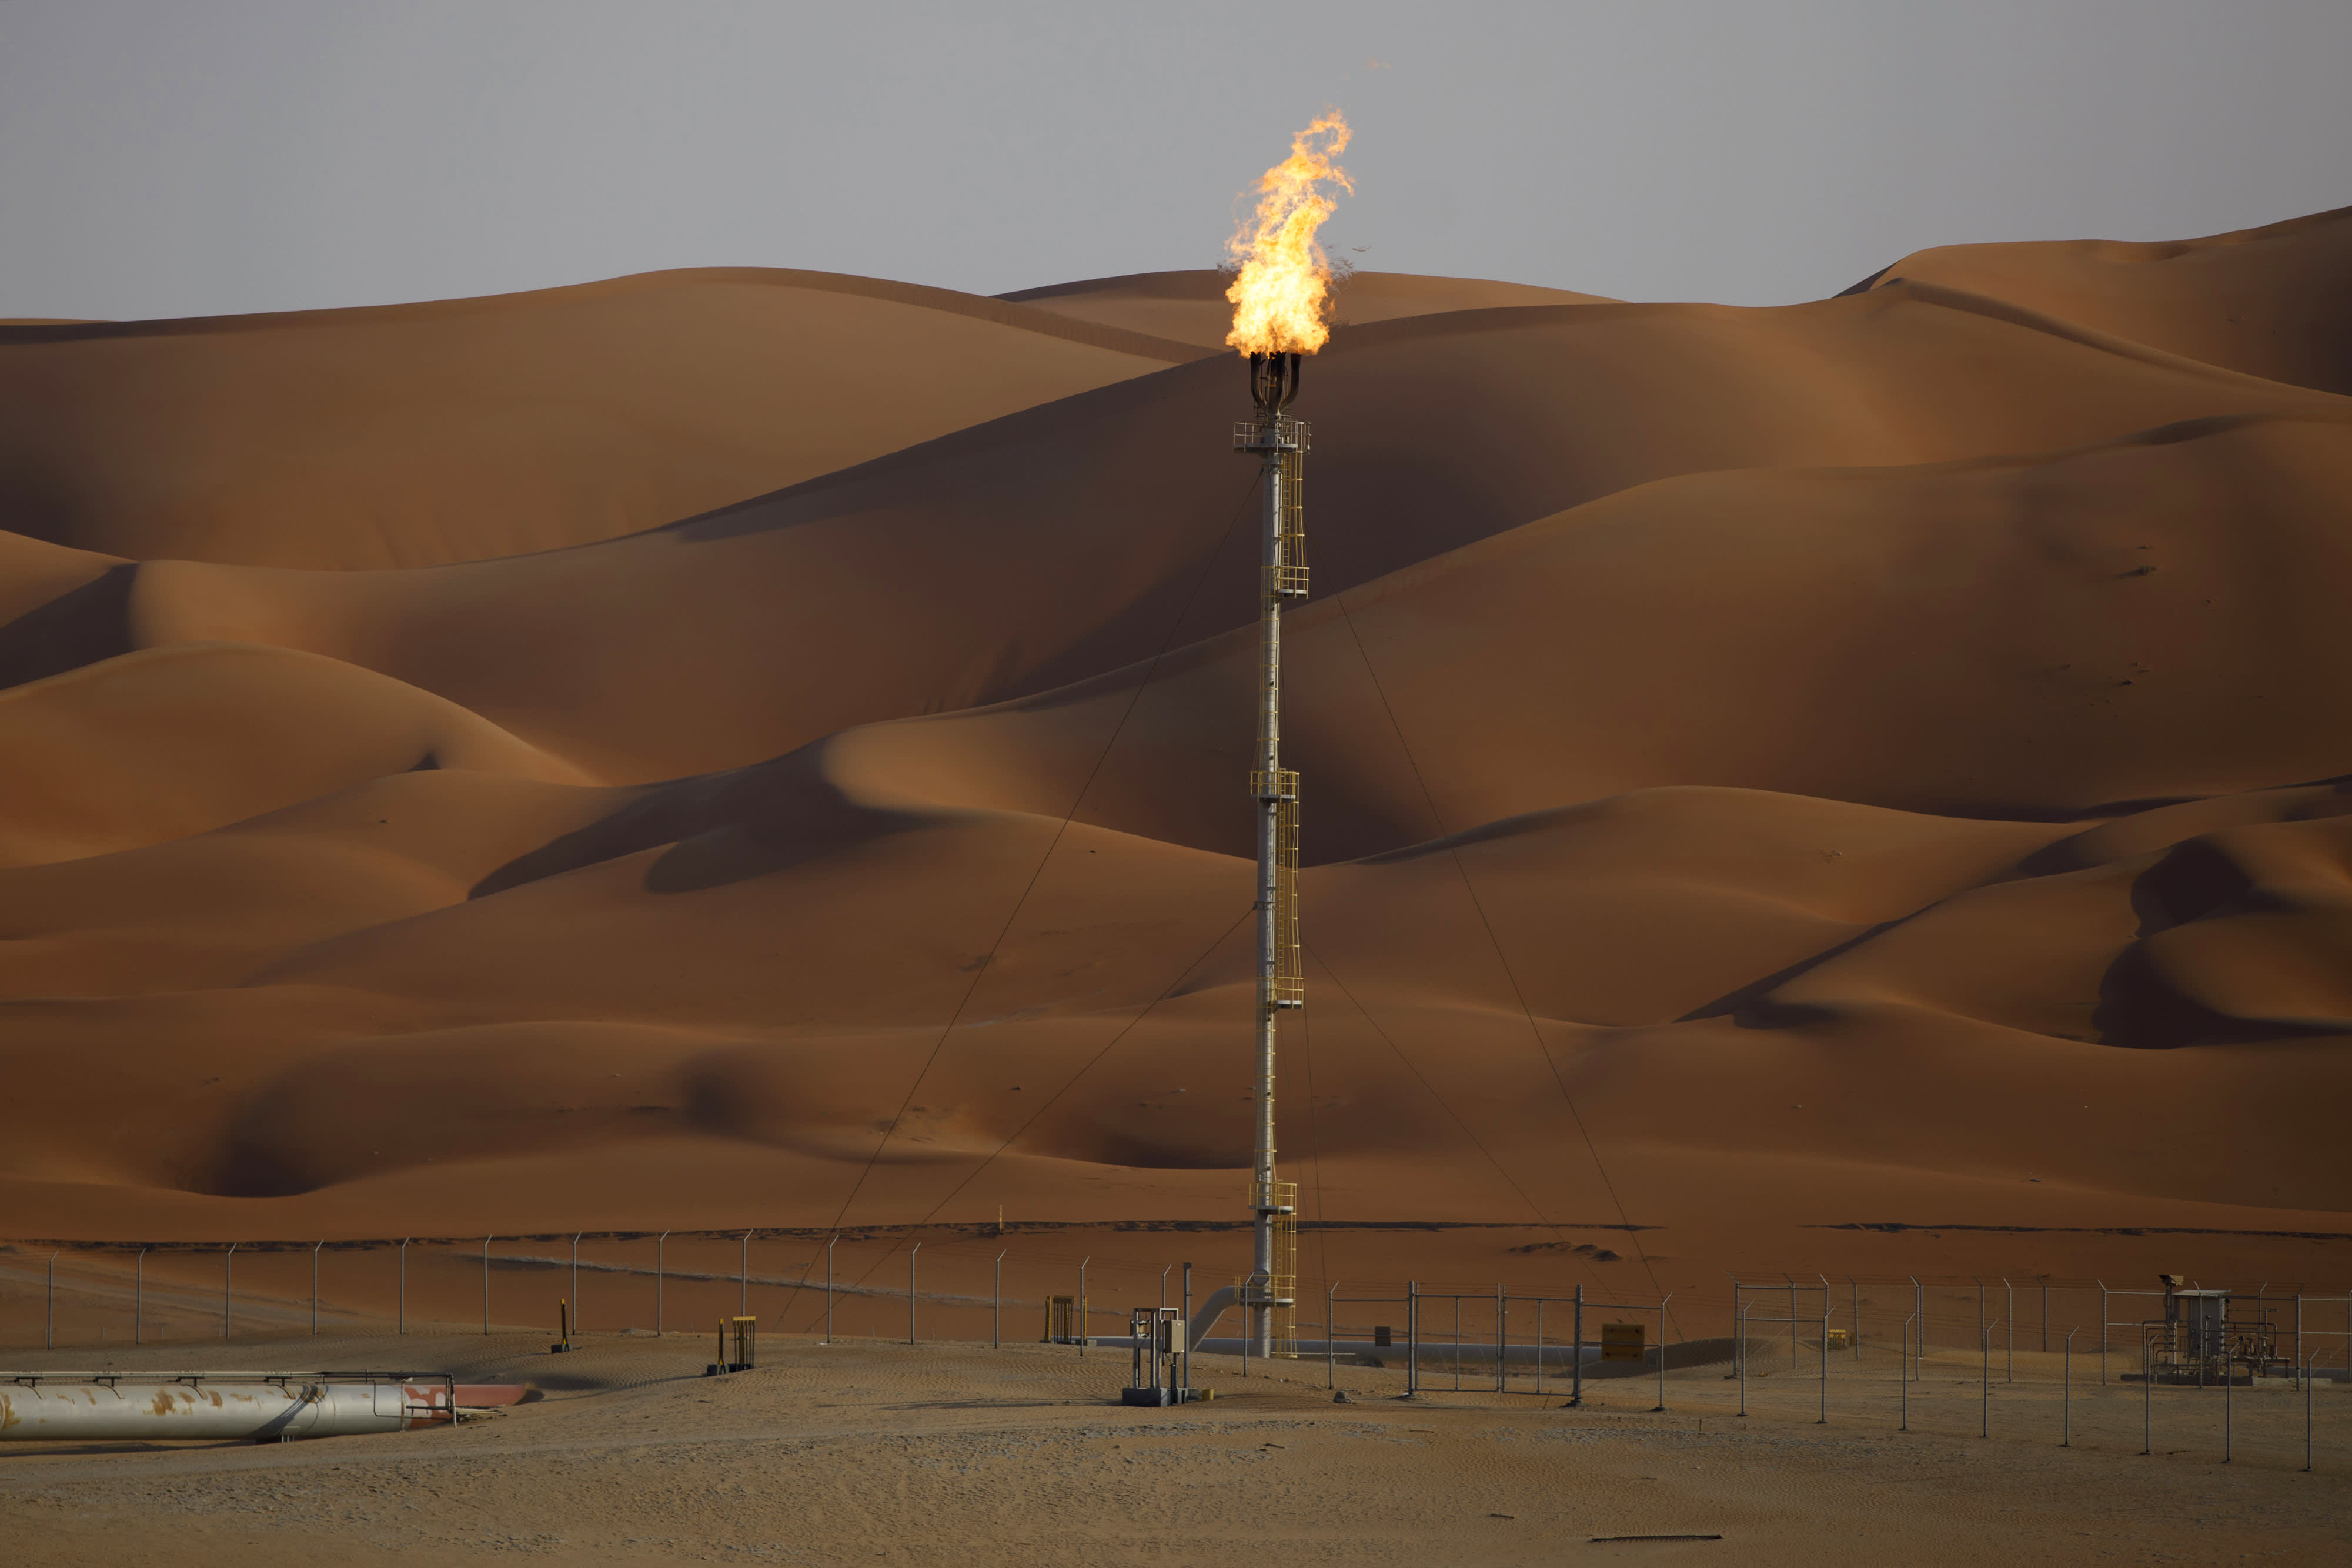 Oil rises for fear of rising tensions in the Middle East